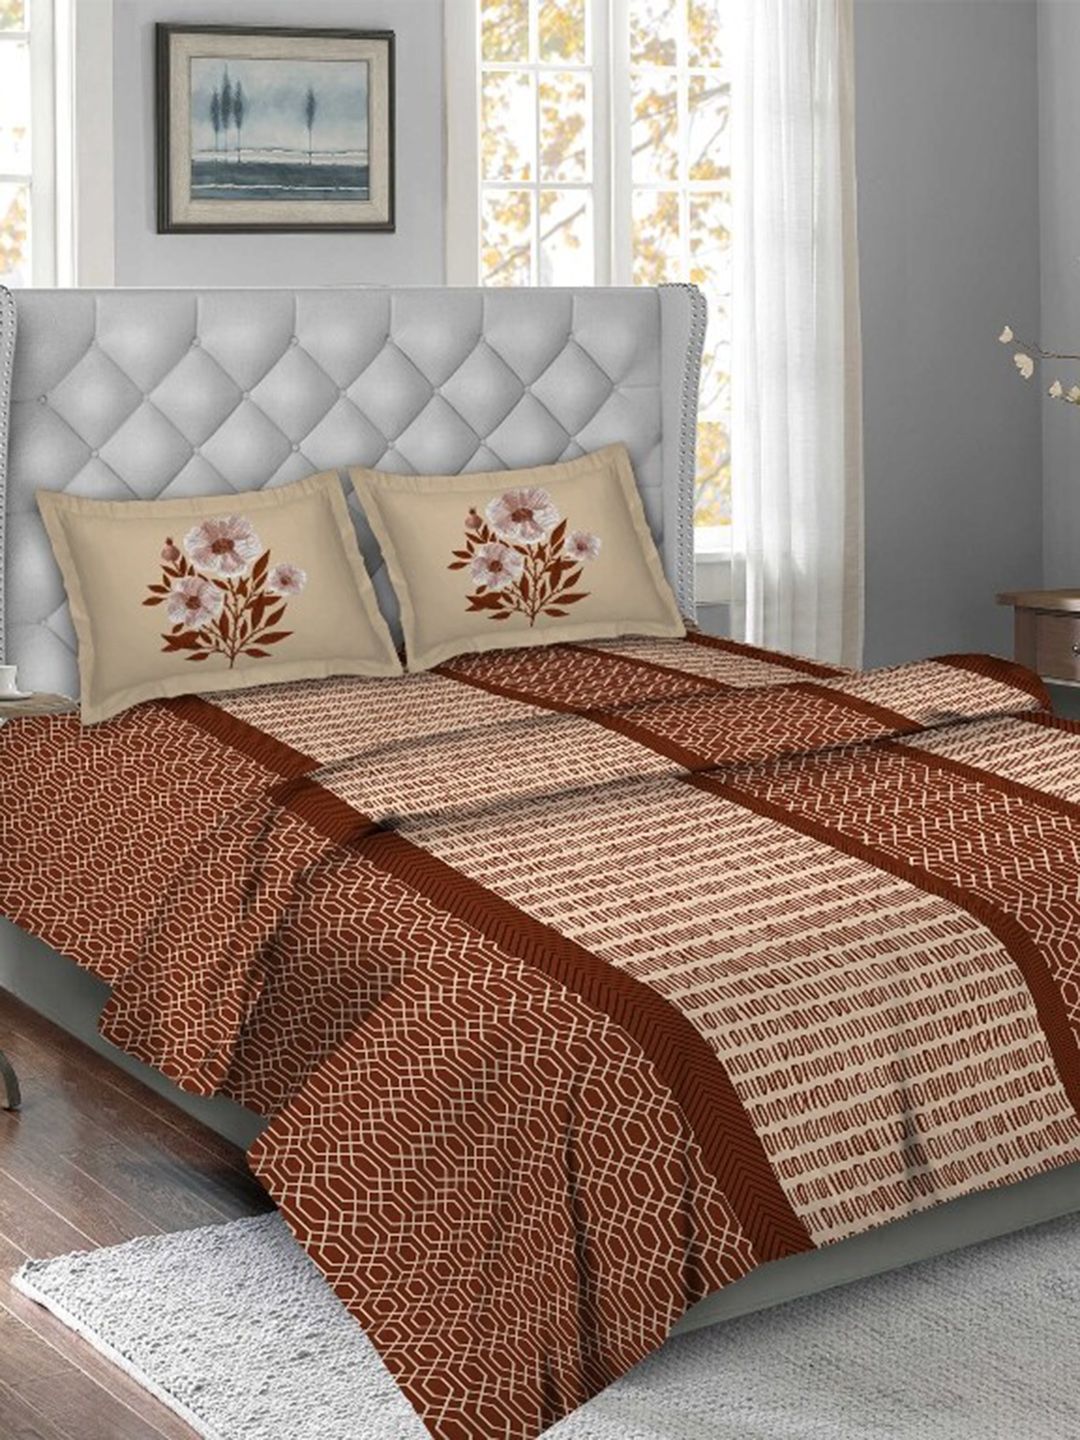 BELLA CASA Brown & Beige Floral Printed Cotton Double King Bedding Set Price in India